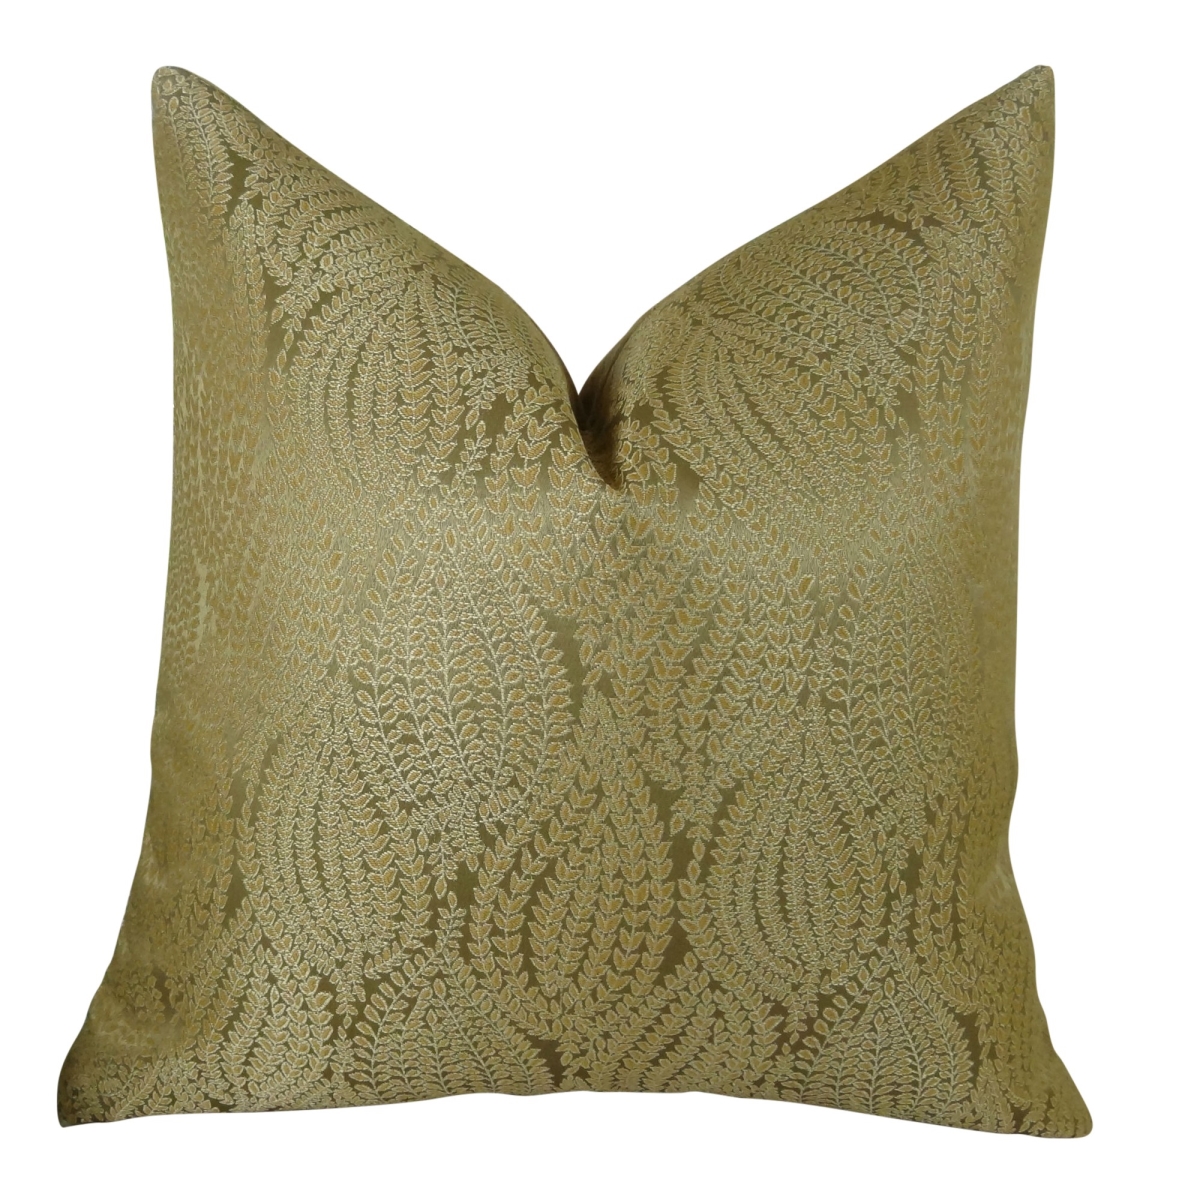 Pb11015-1225-dp Leaf Pod Handmade Double Sided Throw Pillow, Gold - 12 X 25 In.